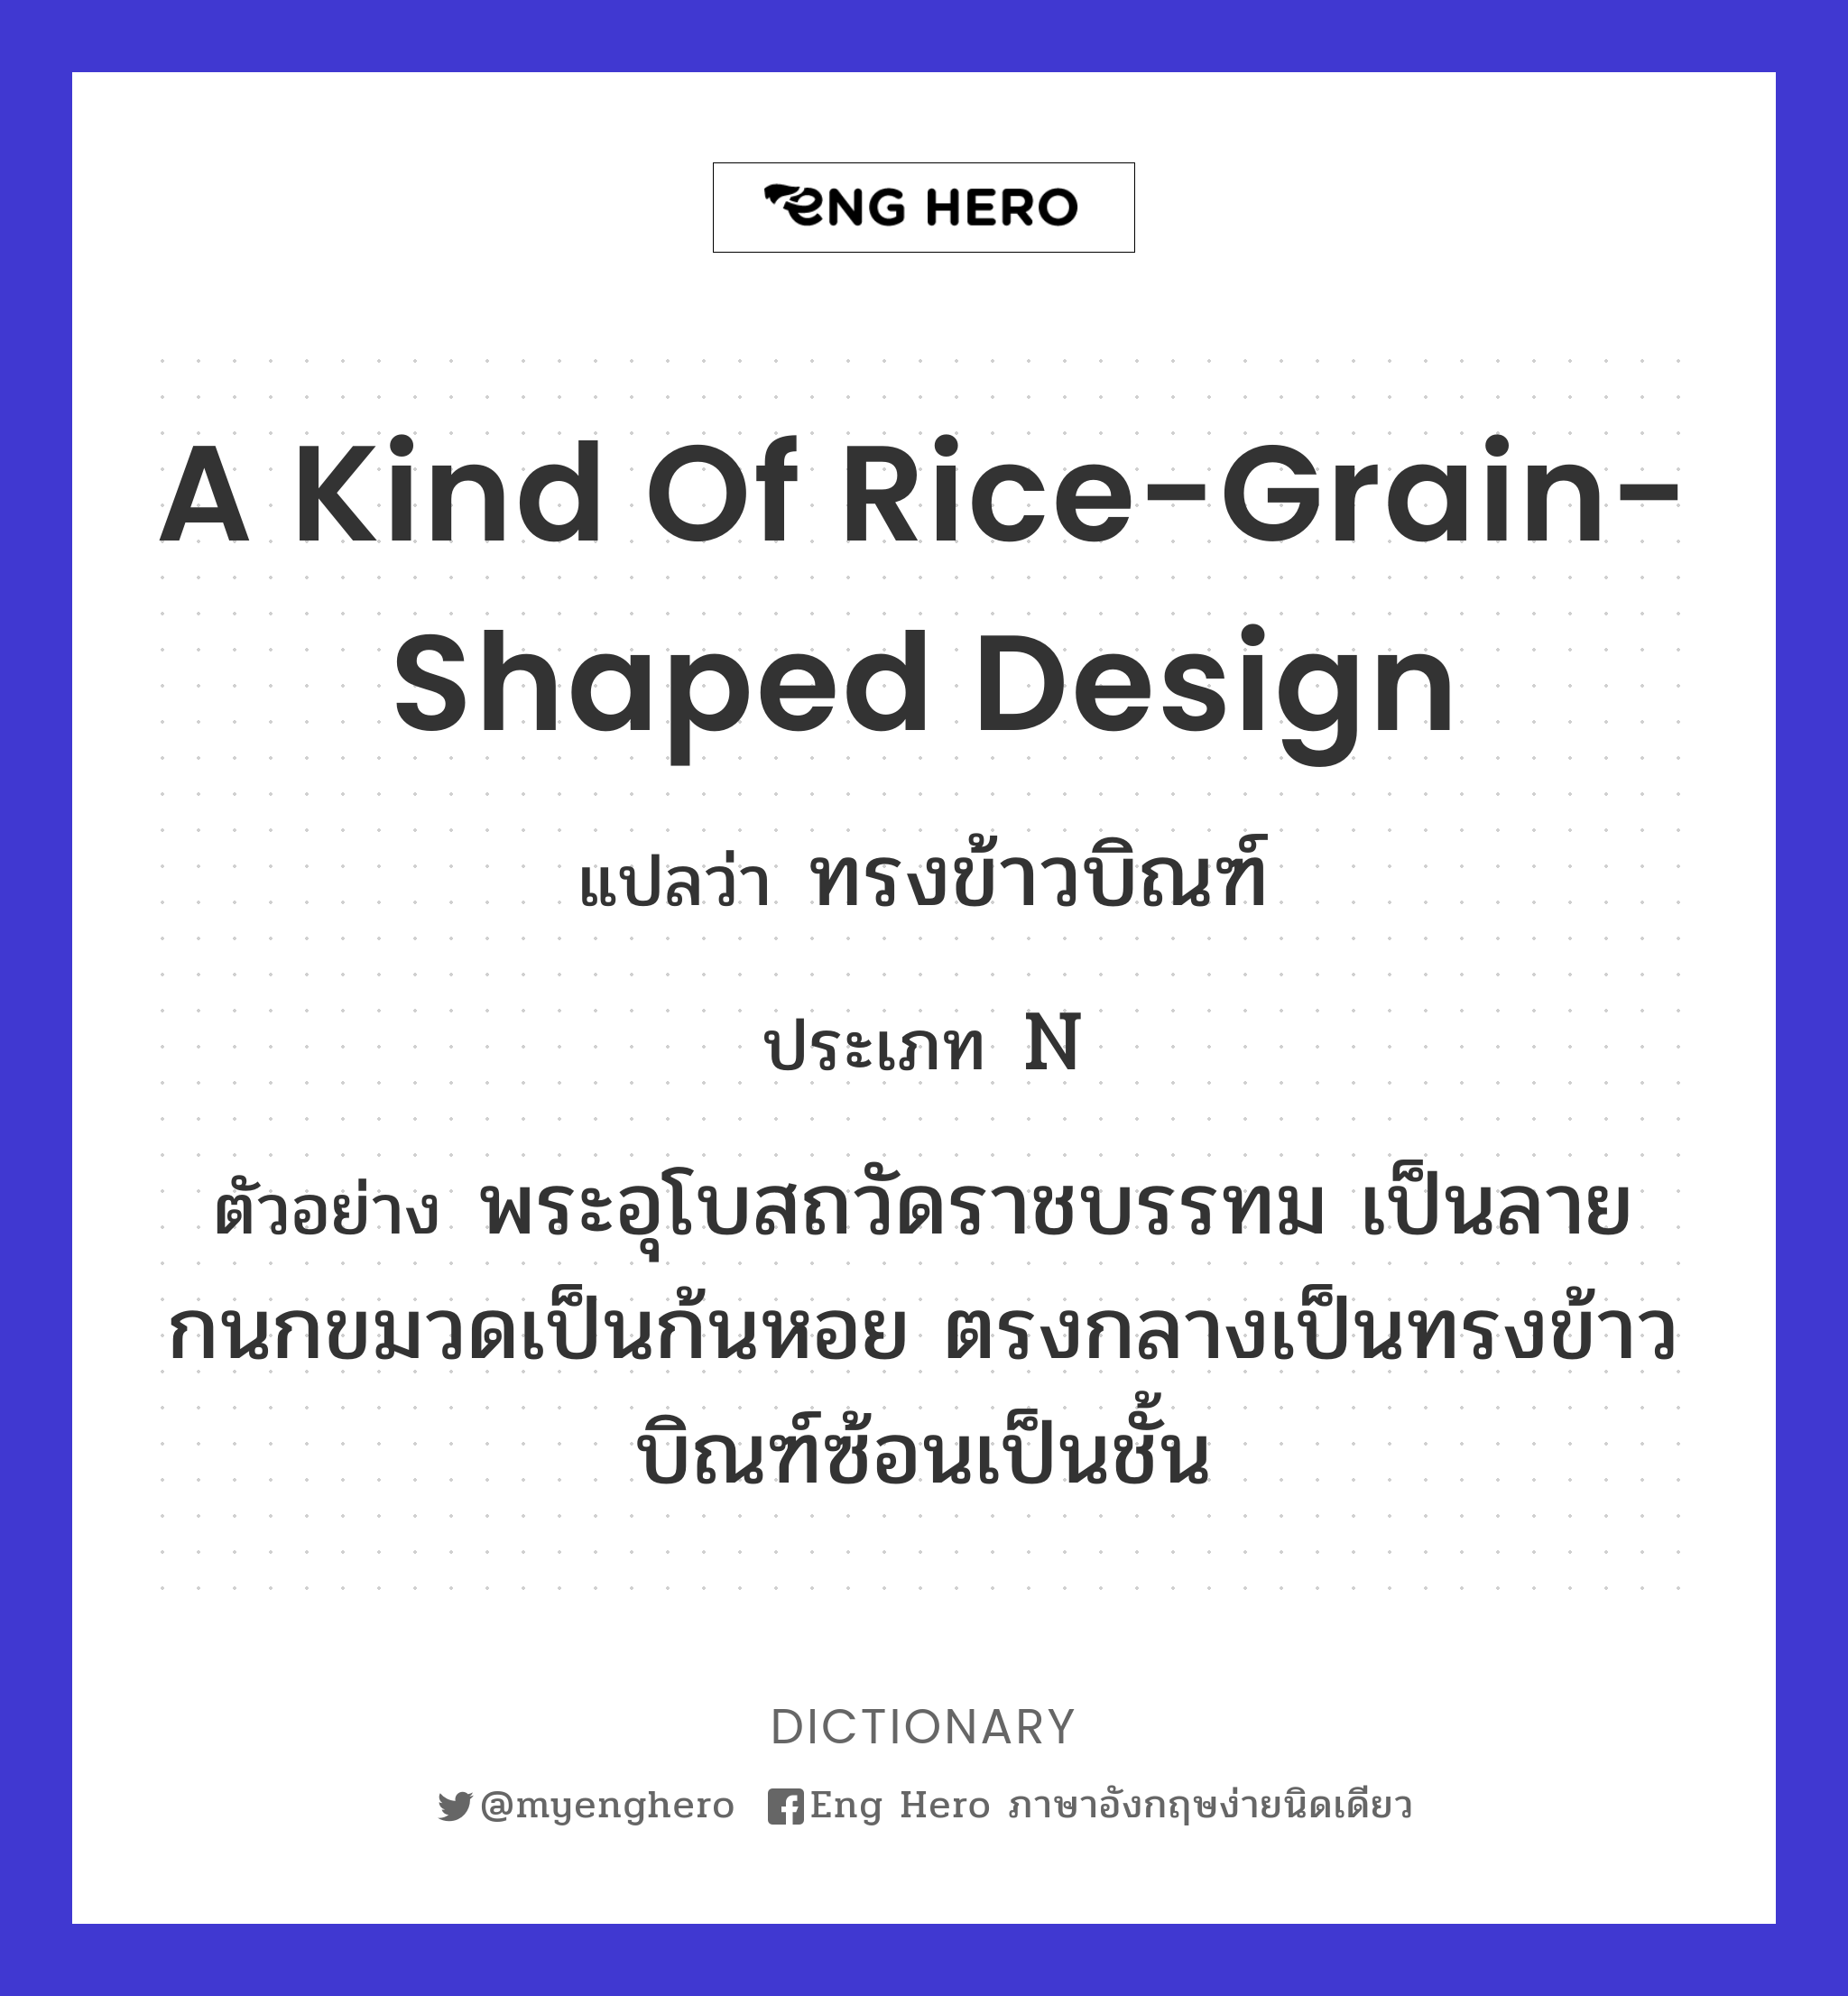 a kind of rice-grain-shaped design